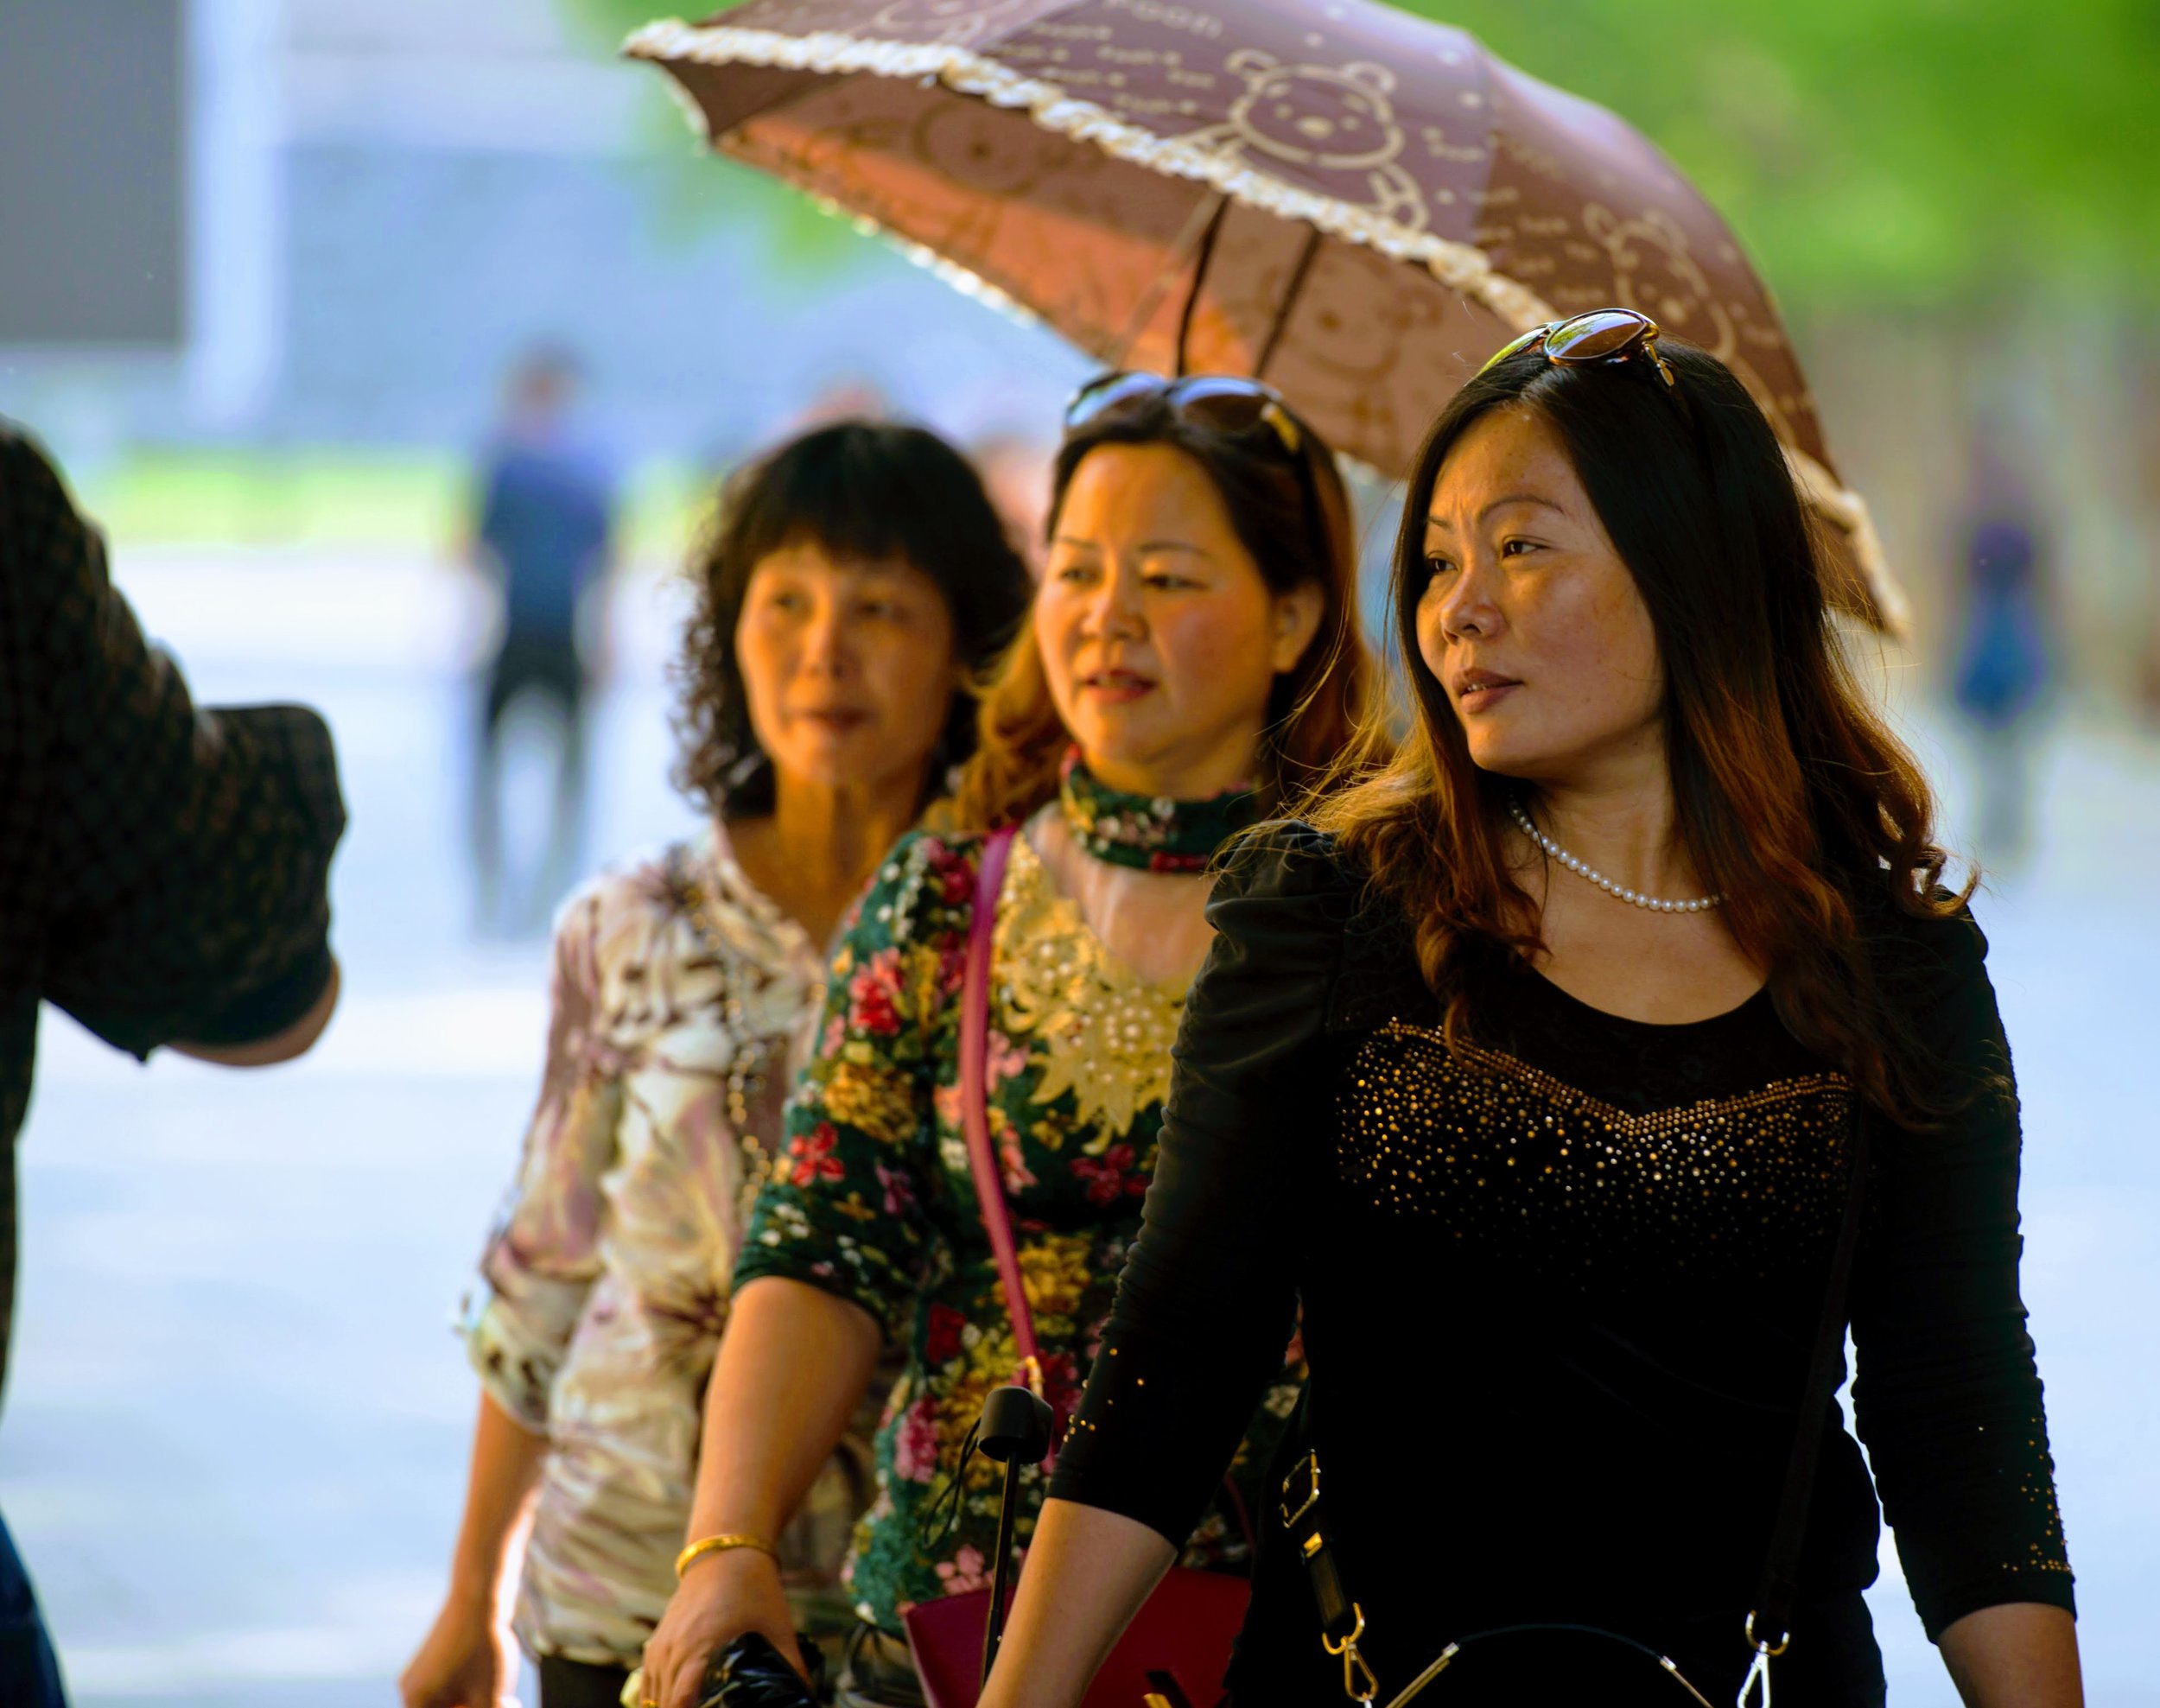  Chinese women walk past a street musician while taking a stroll in Beijing, China.   